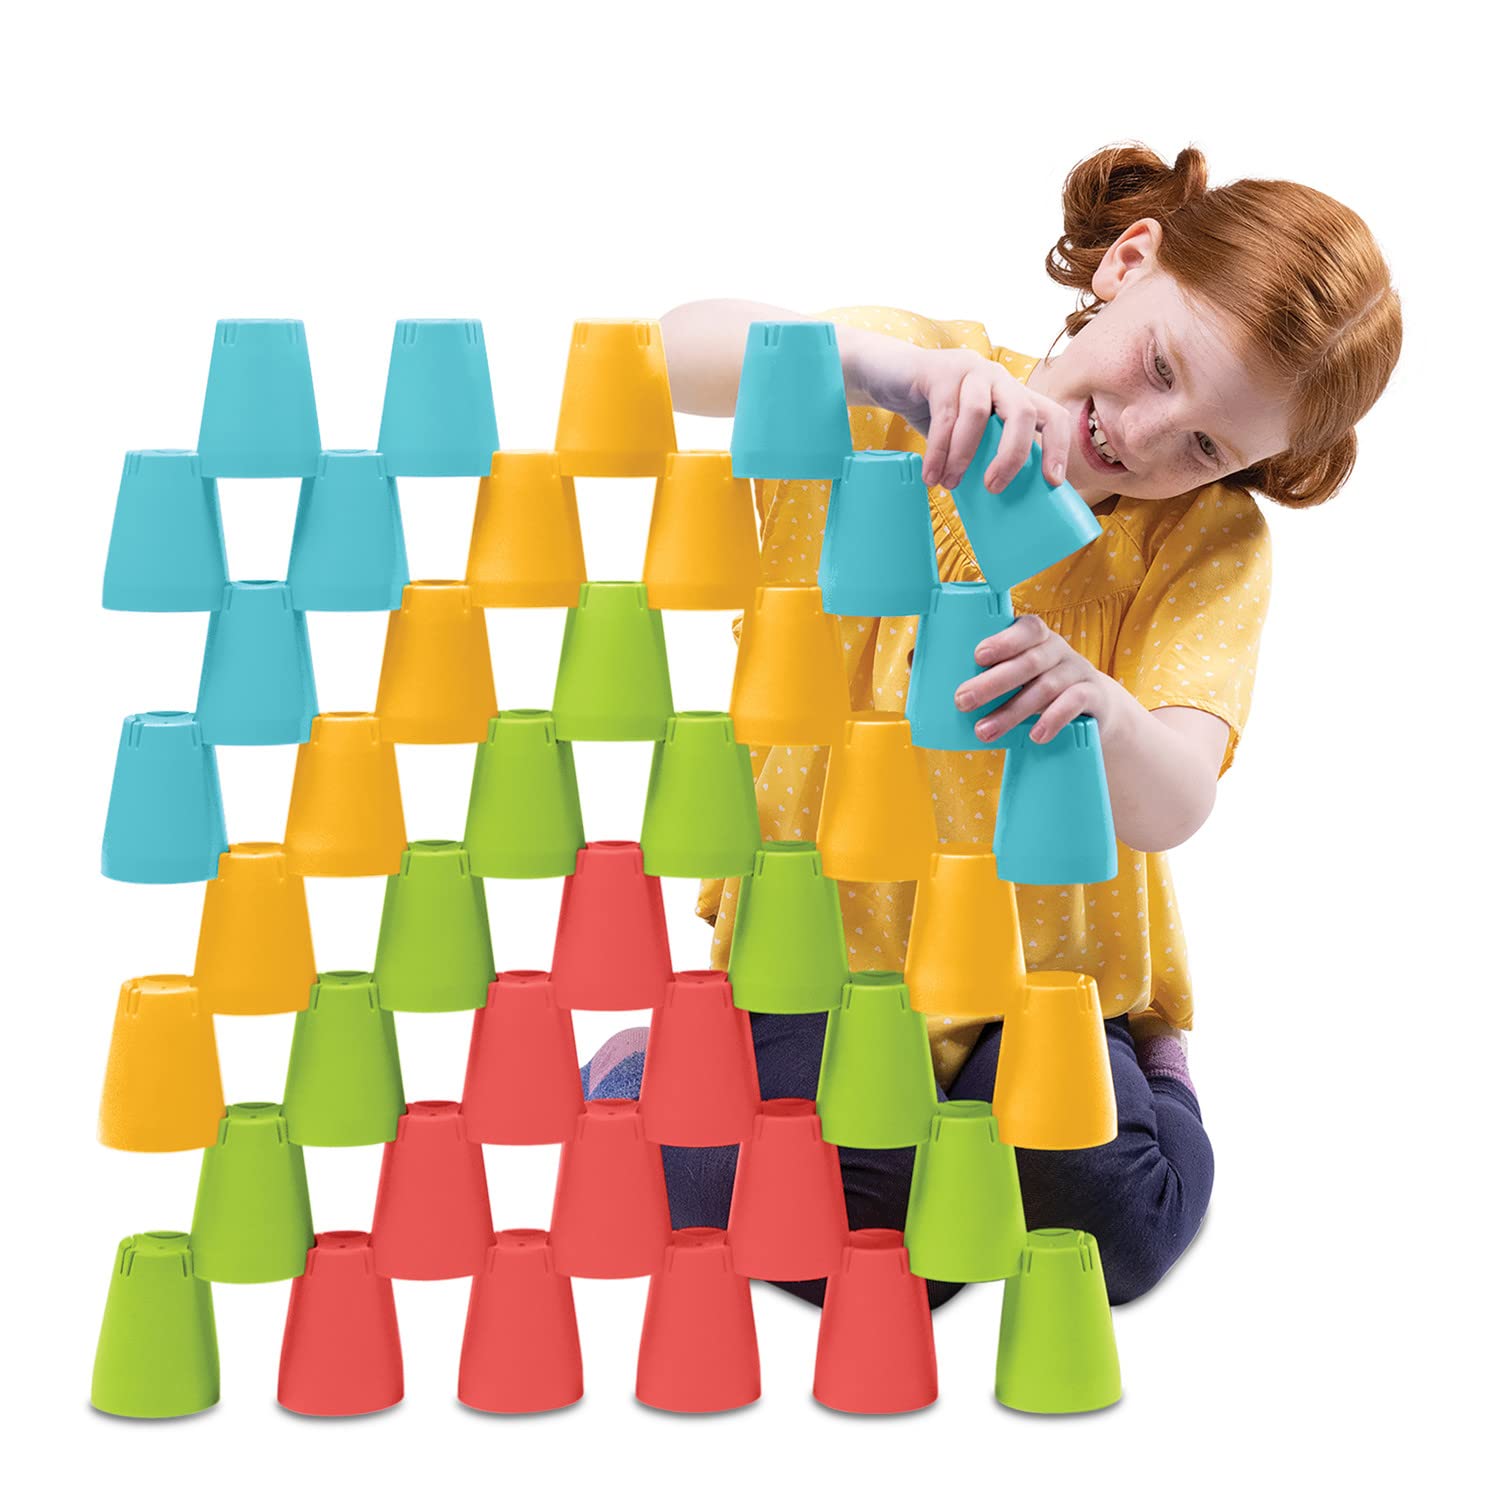 MindWare CupStruction – Interlocking Building & Stacking Toy for Kids Ages 3 & Up – Boosts Fine Motor Skills and Hand-Eye Coordination